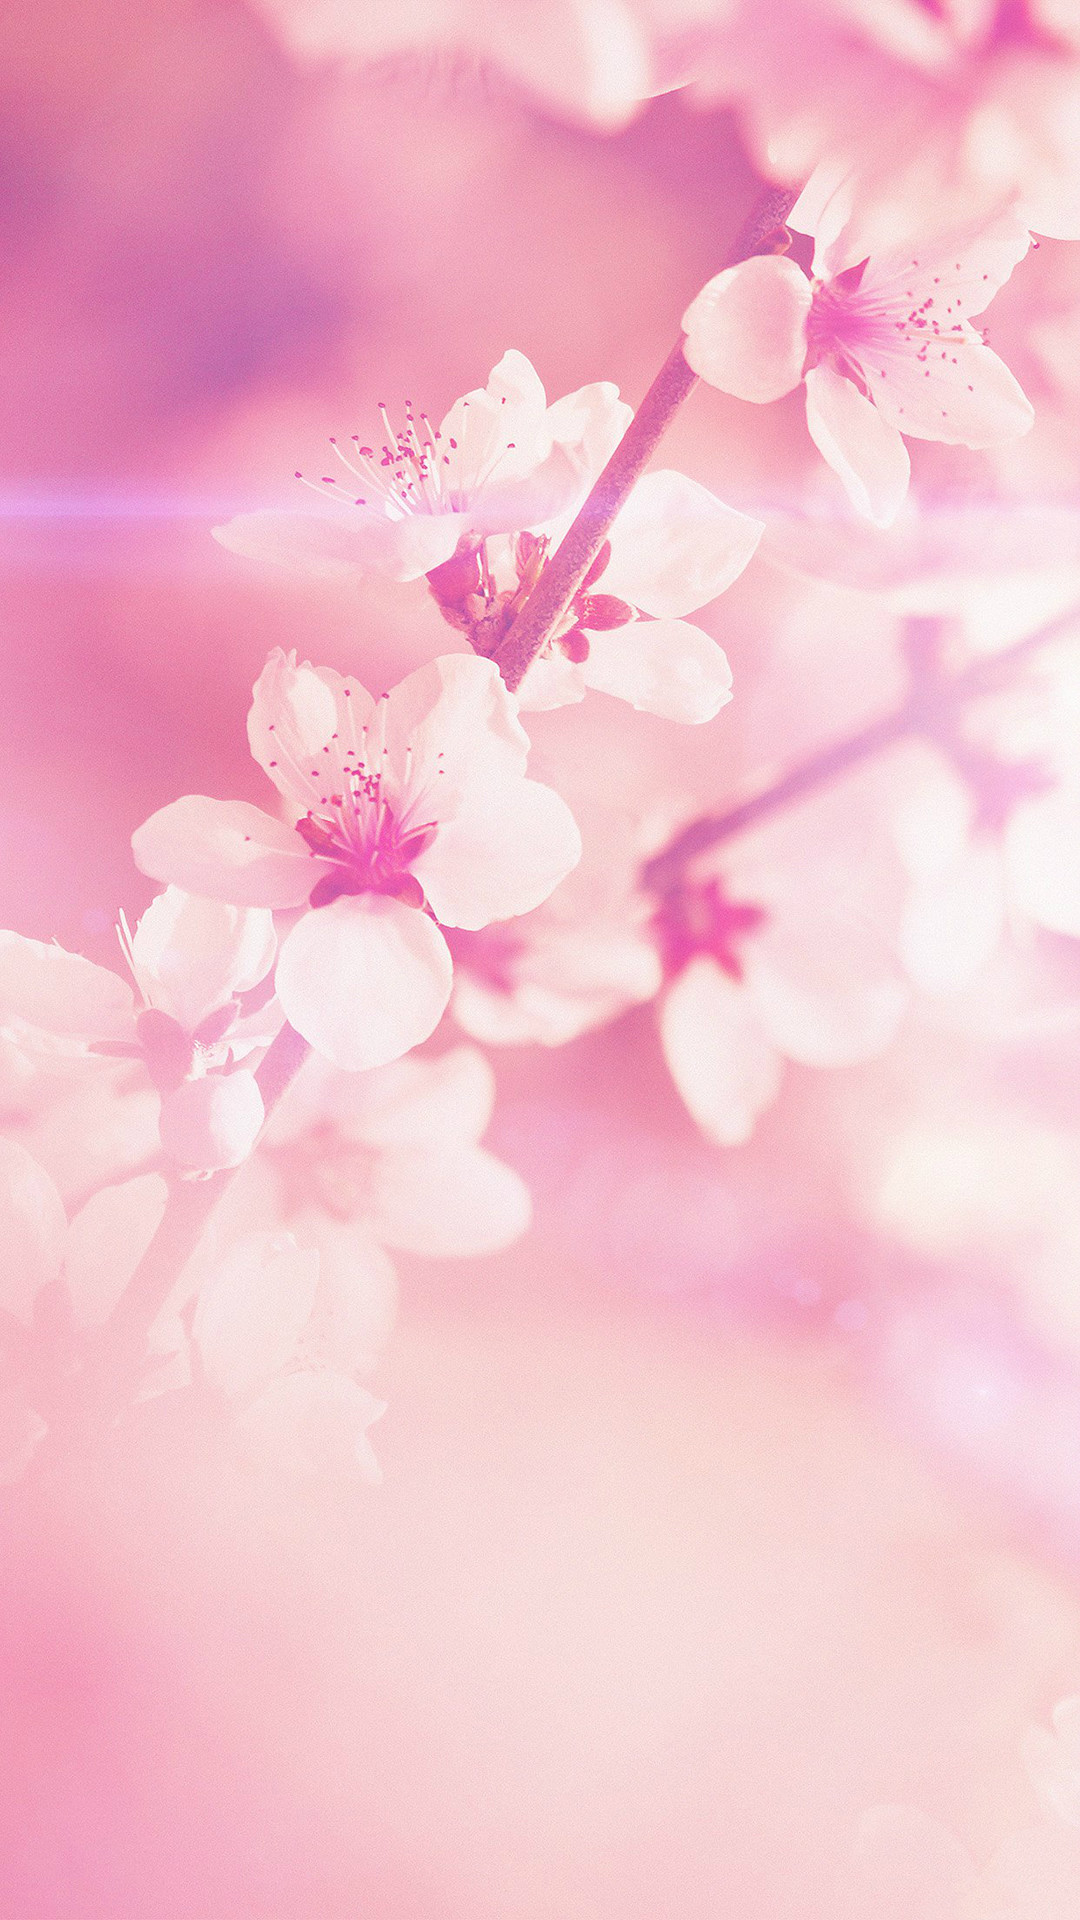 1080x1920 Spring Flower Pink Cherry Blossom Flare Nature iPhone 6 wallpaper